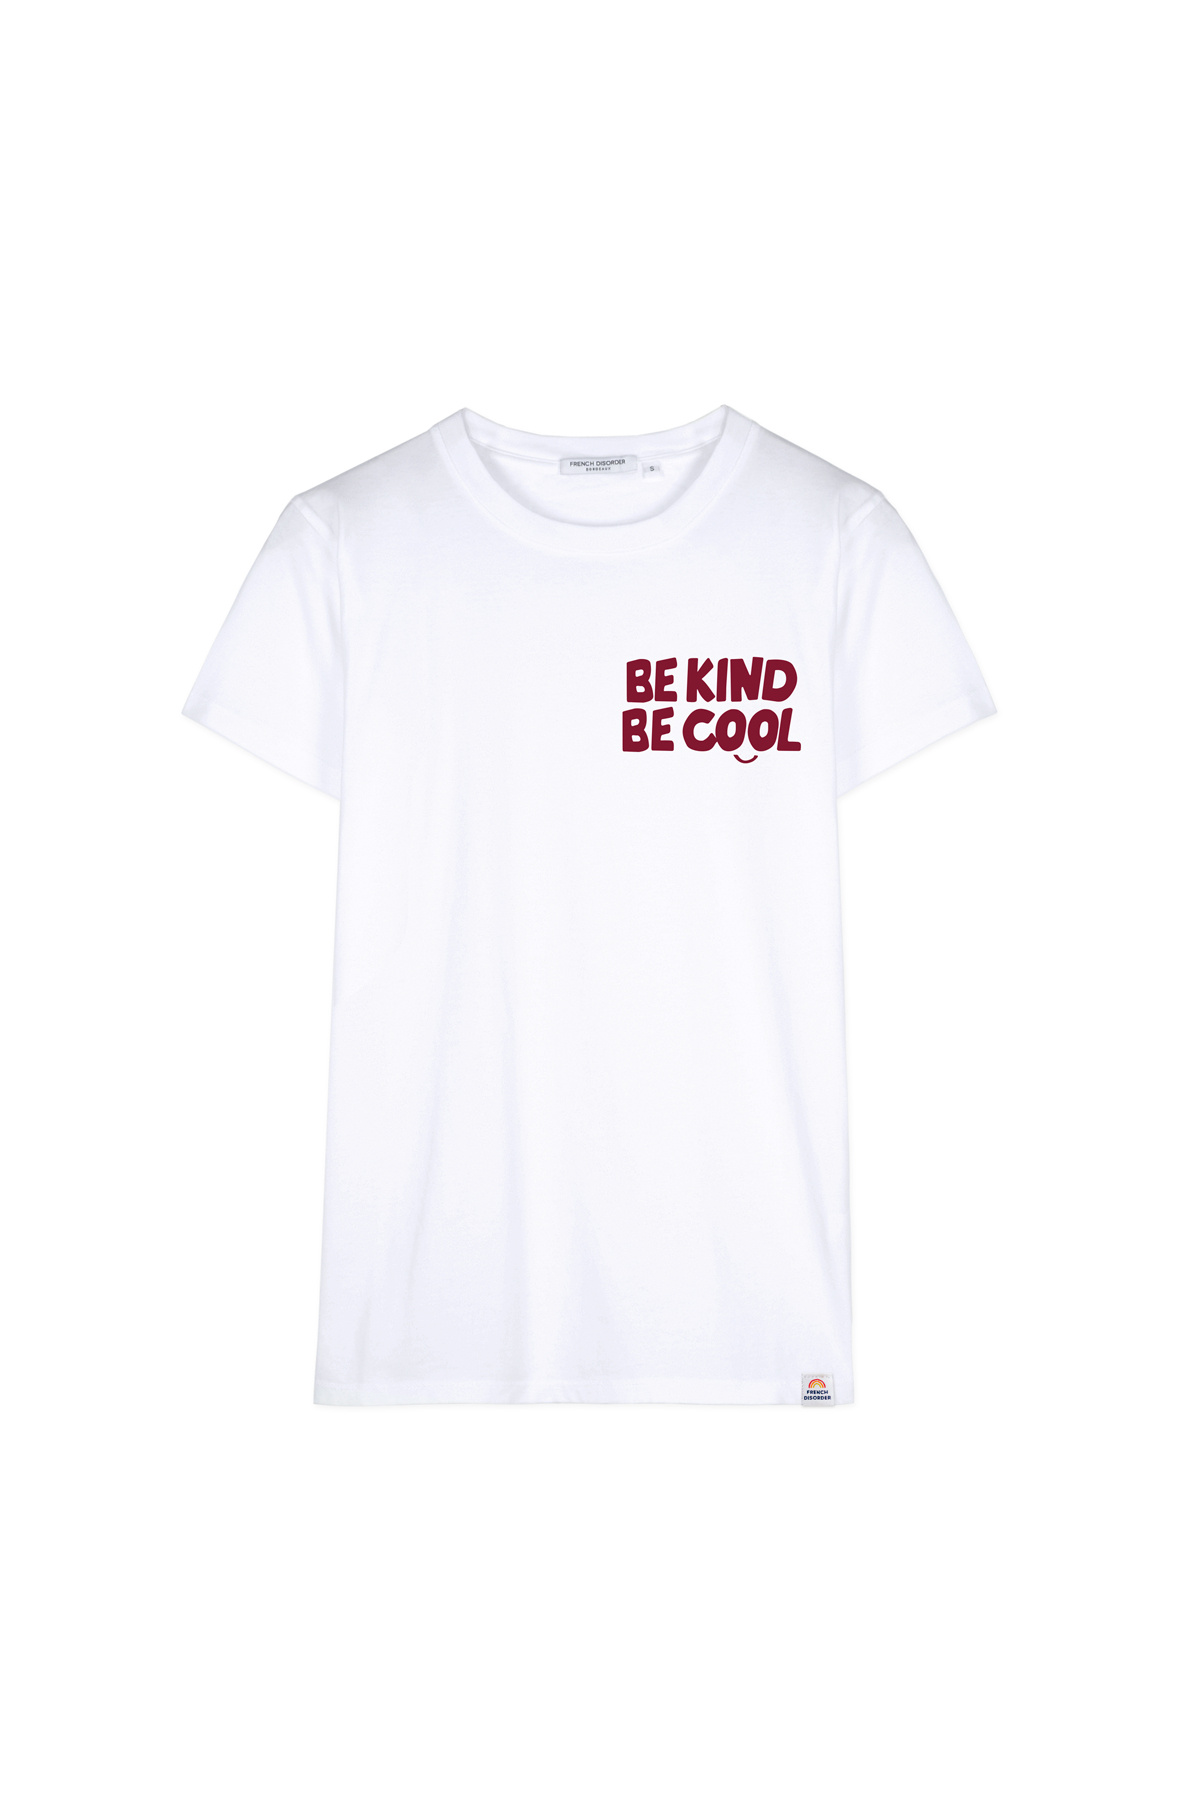 Tshirt BE KIND BE COOL